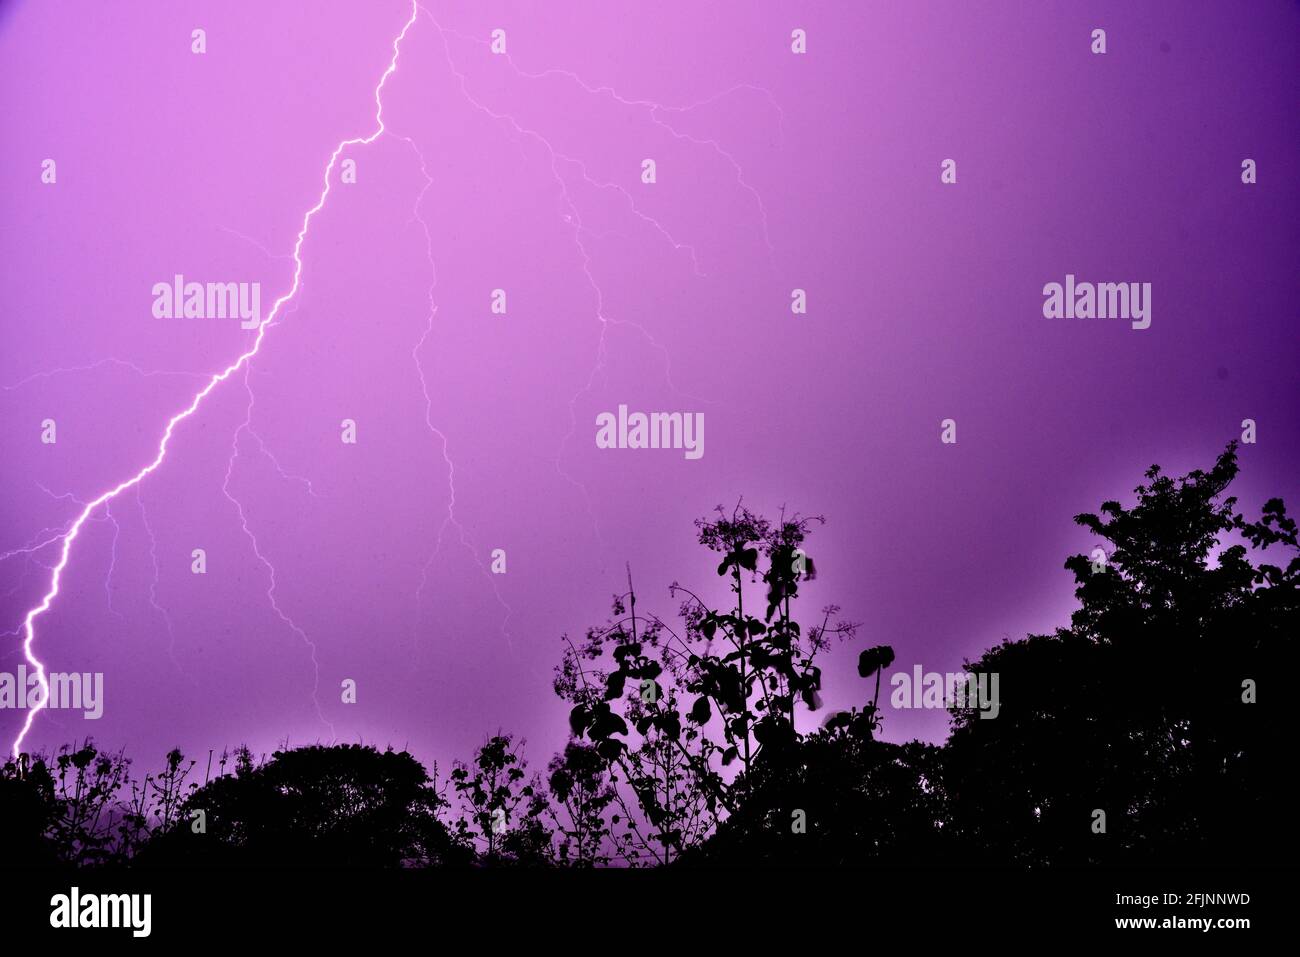 Lightning during a thunder storm in Thailand Stock Photo